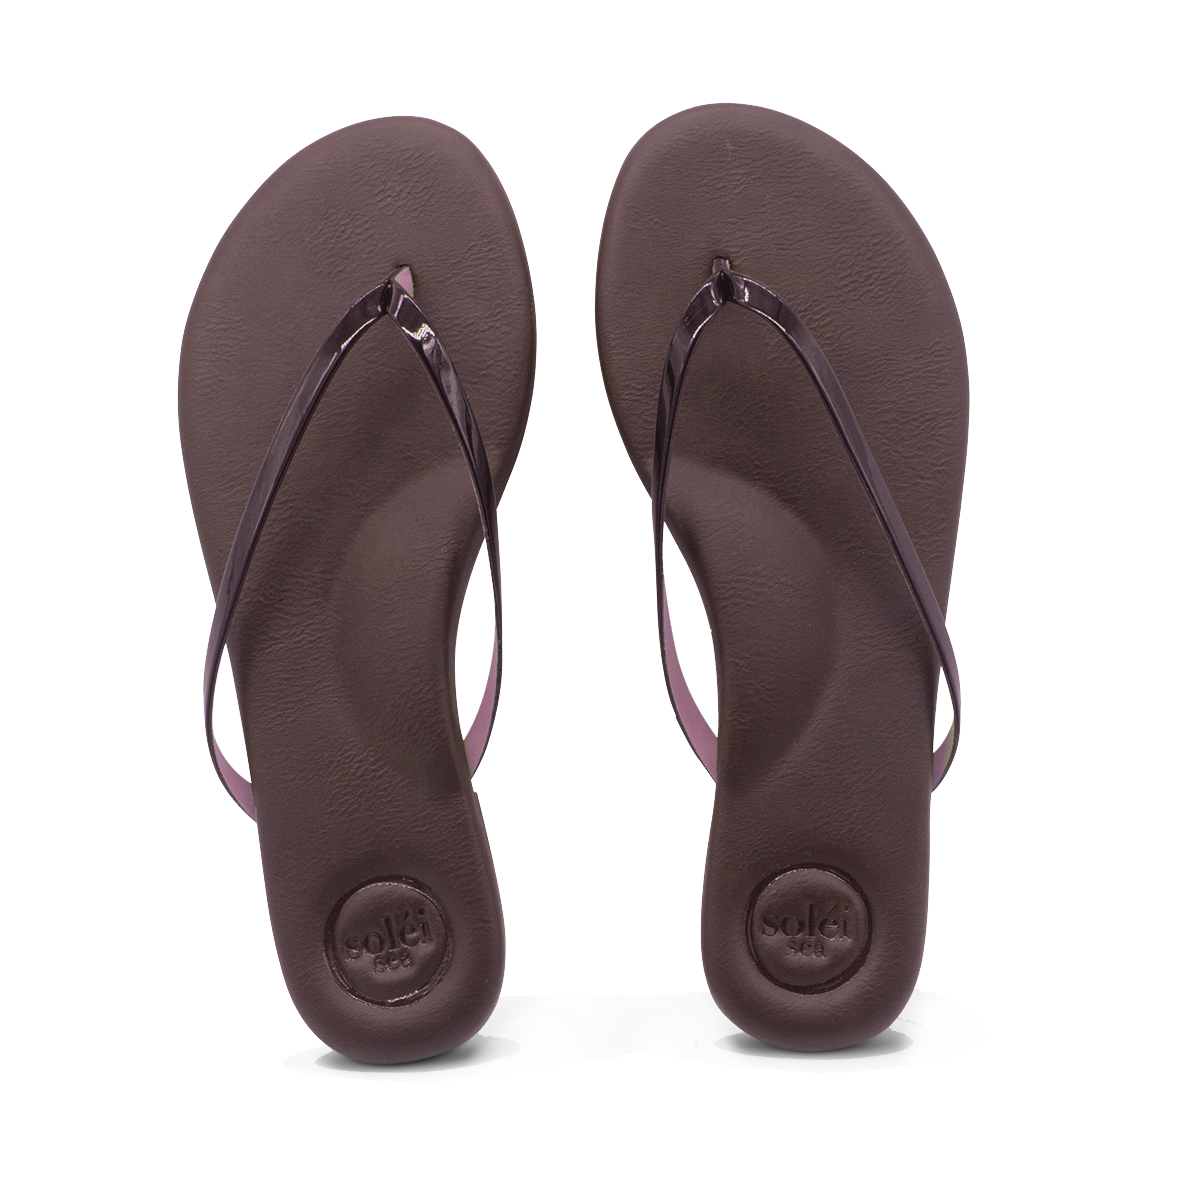 Solei Sea Indie Sandal in Cocoa w/ Pink